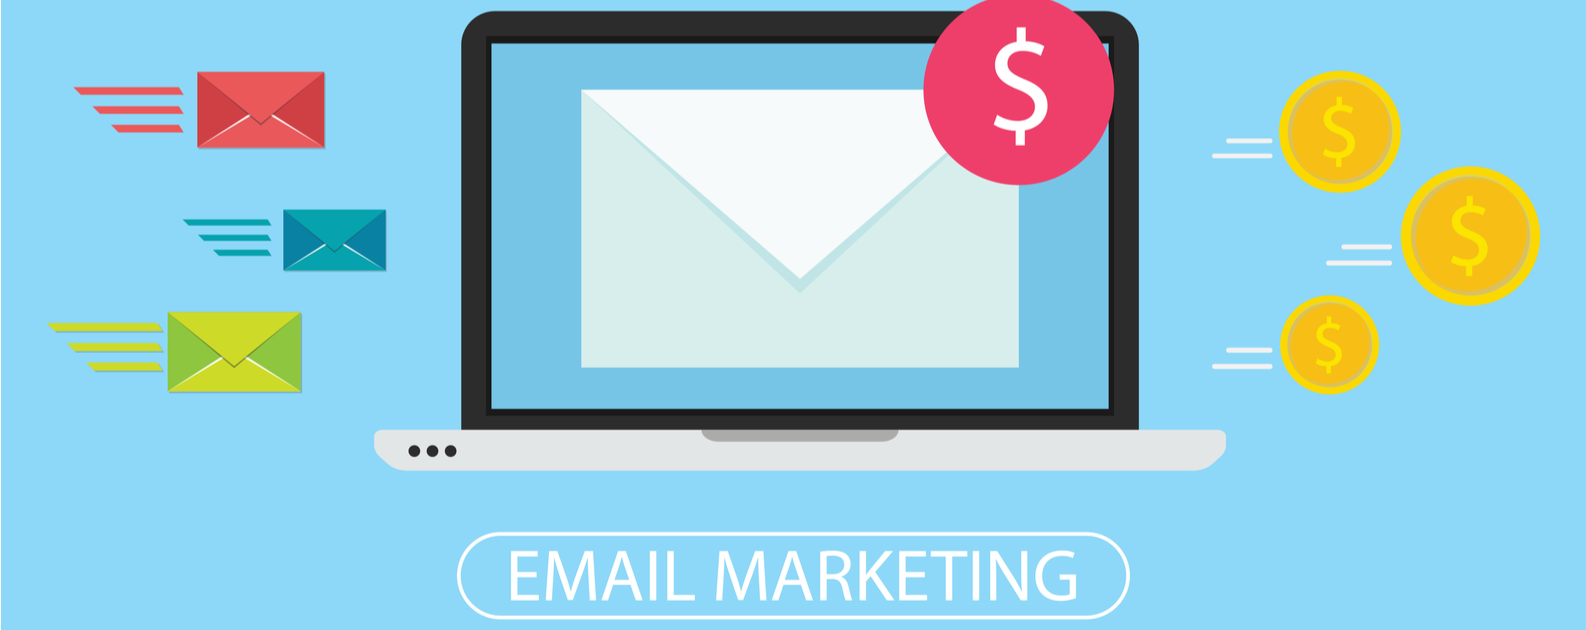 5 Ways to Improve Your Email Marketing ROI